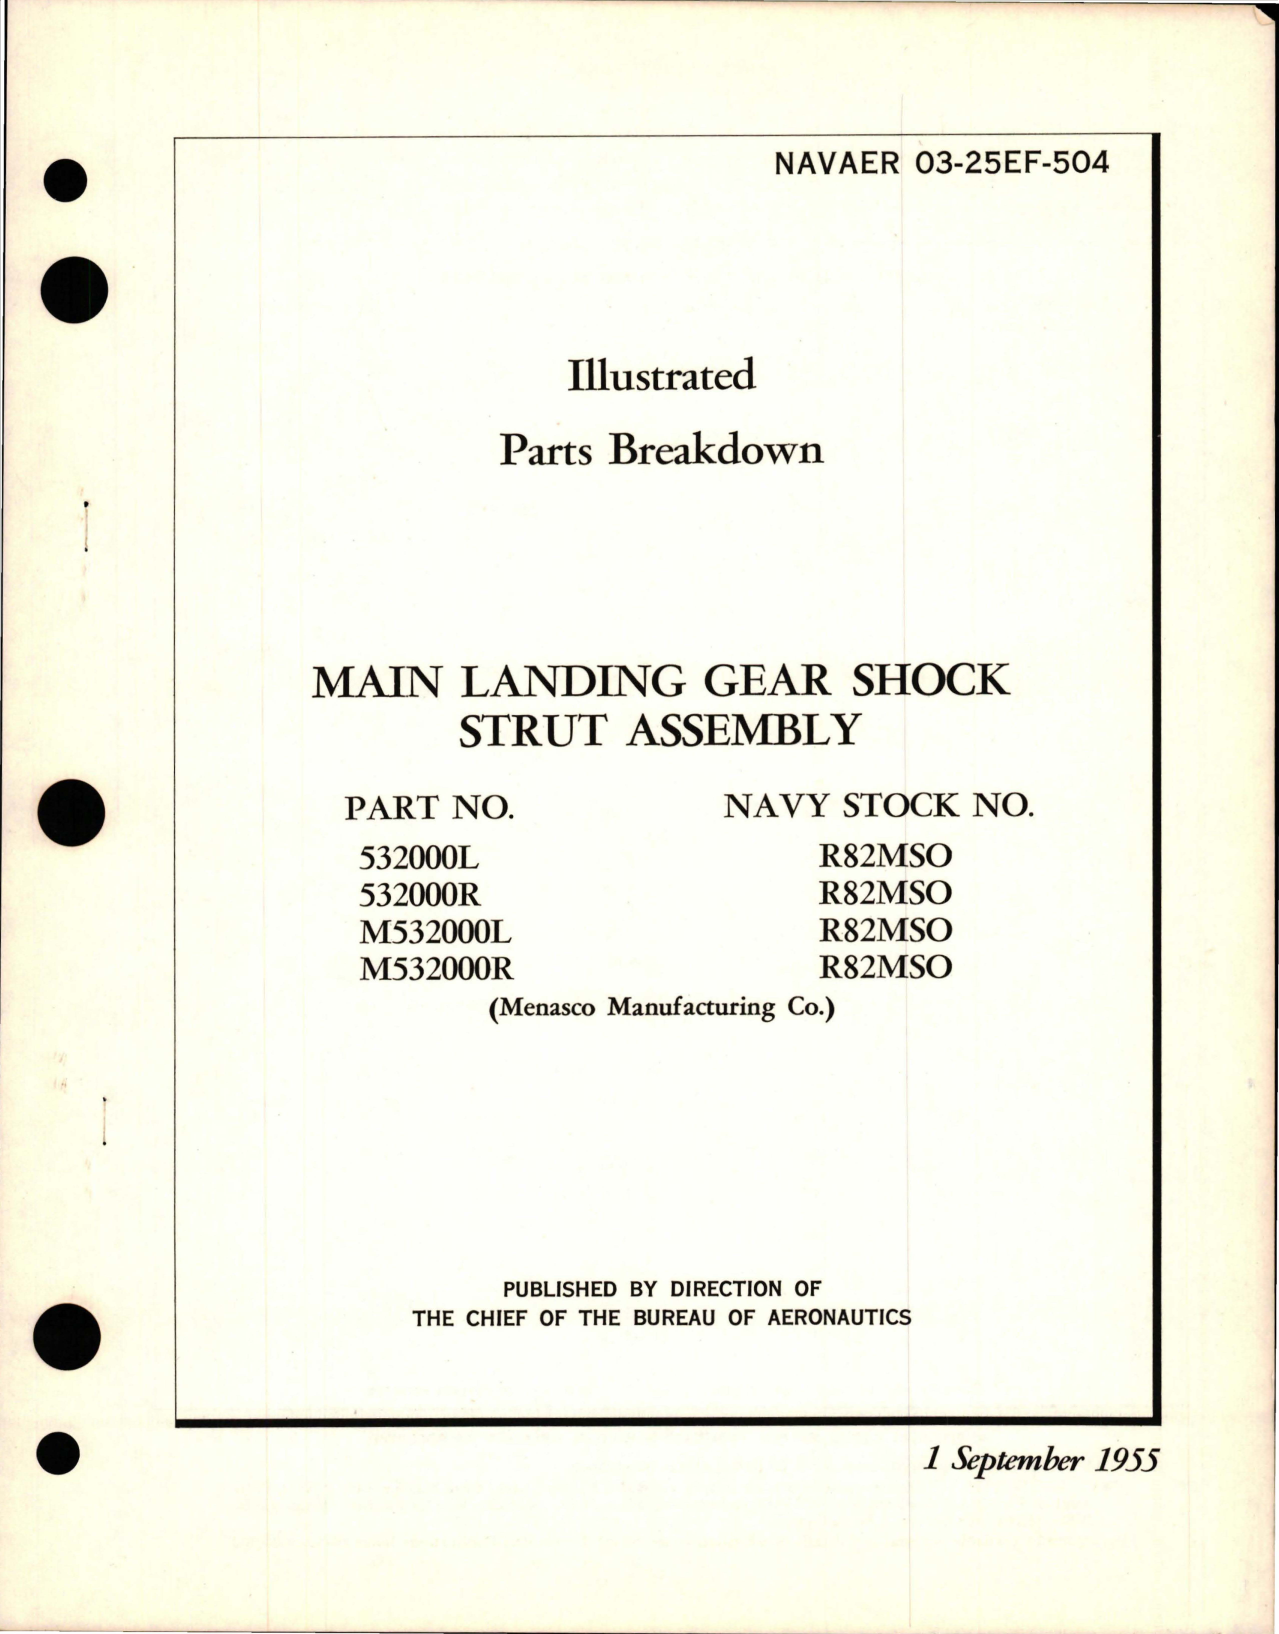 Sample page 1 from AirCorps Library document: Illustrated Parts Breakdown for Main Landing Gear Shock Strut Assembly 